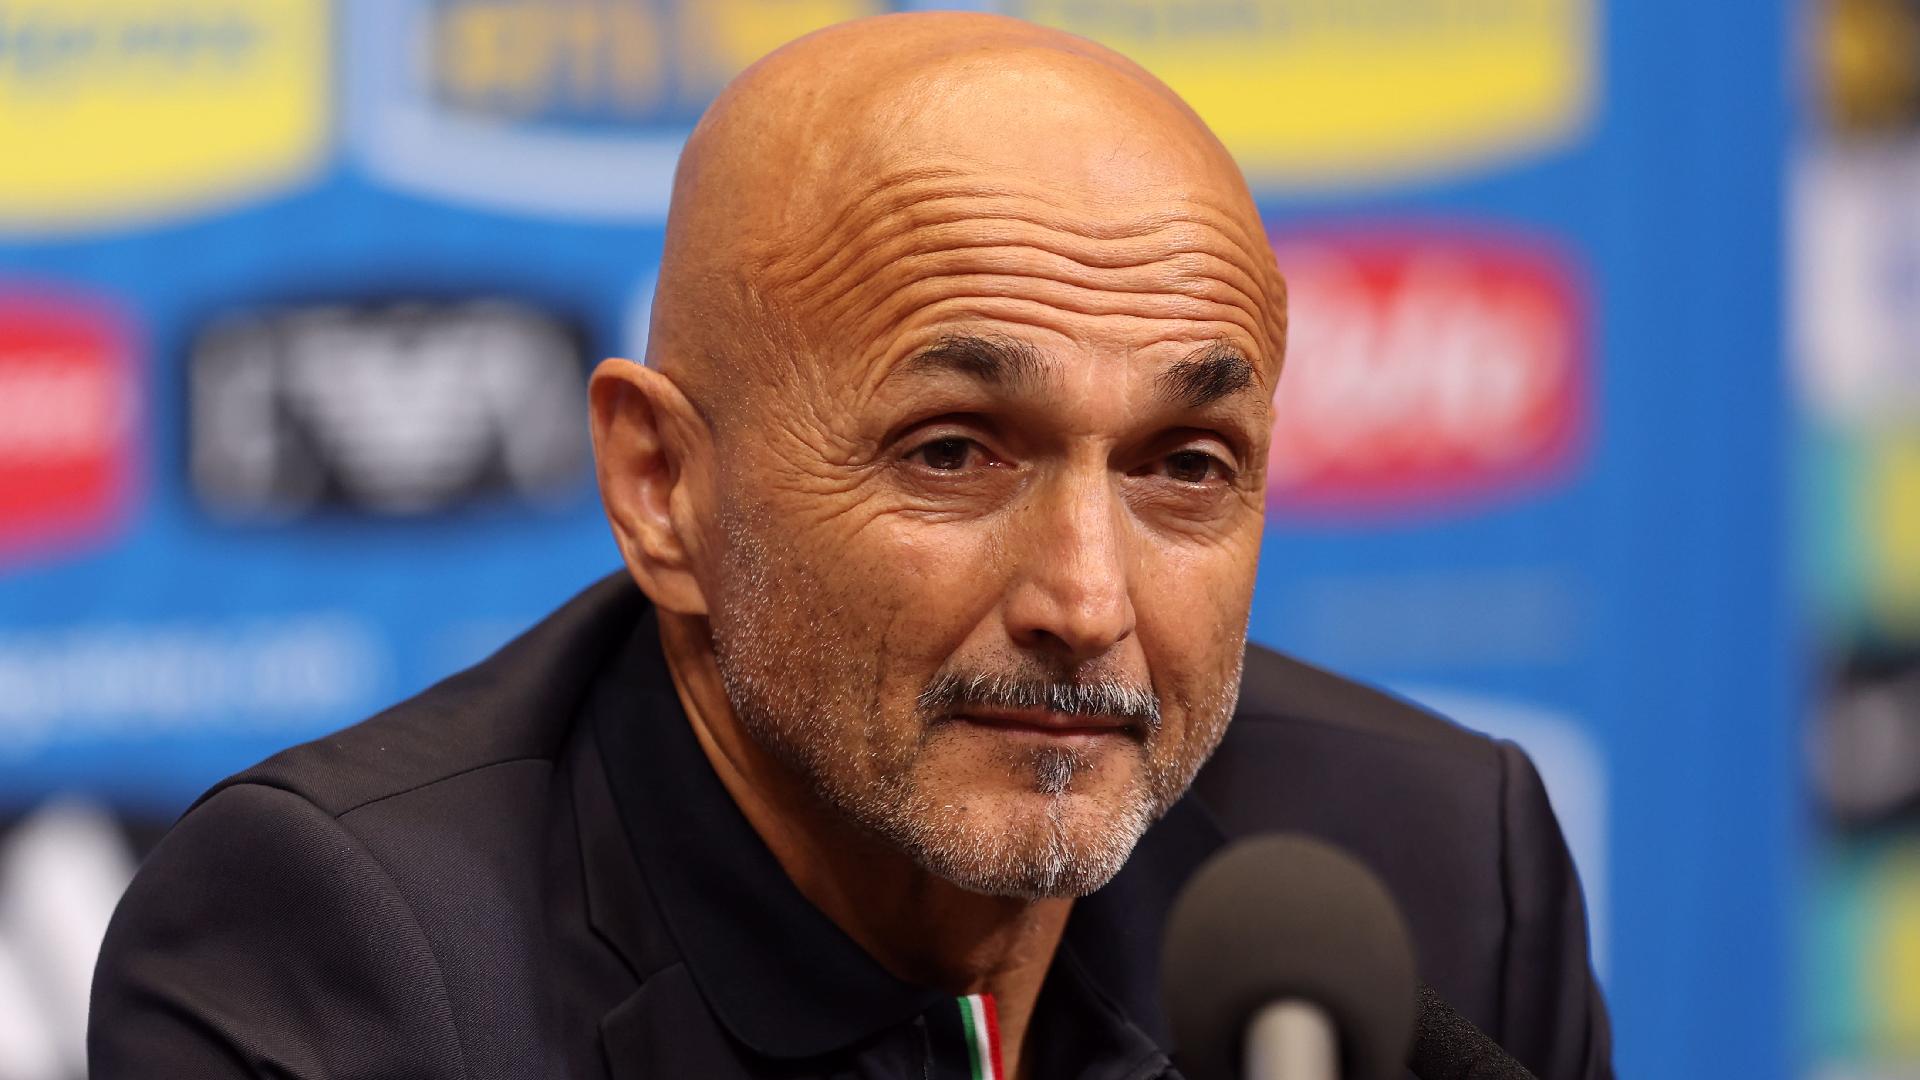 Italy boss Luciano Spalletti faces the media at Wembley (George Tewkesbury/PA Wire)